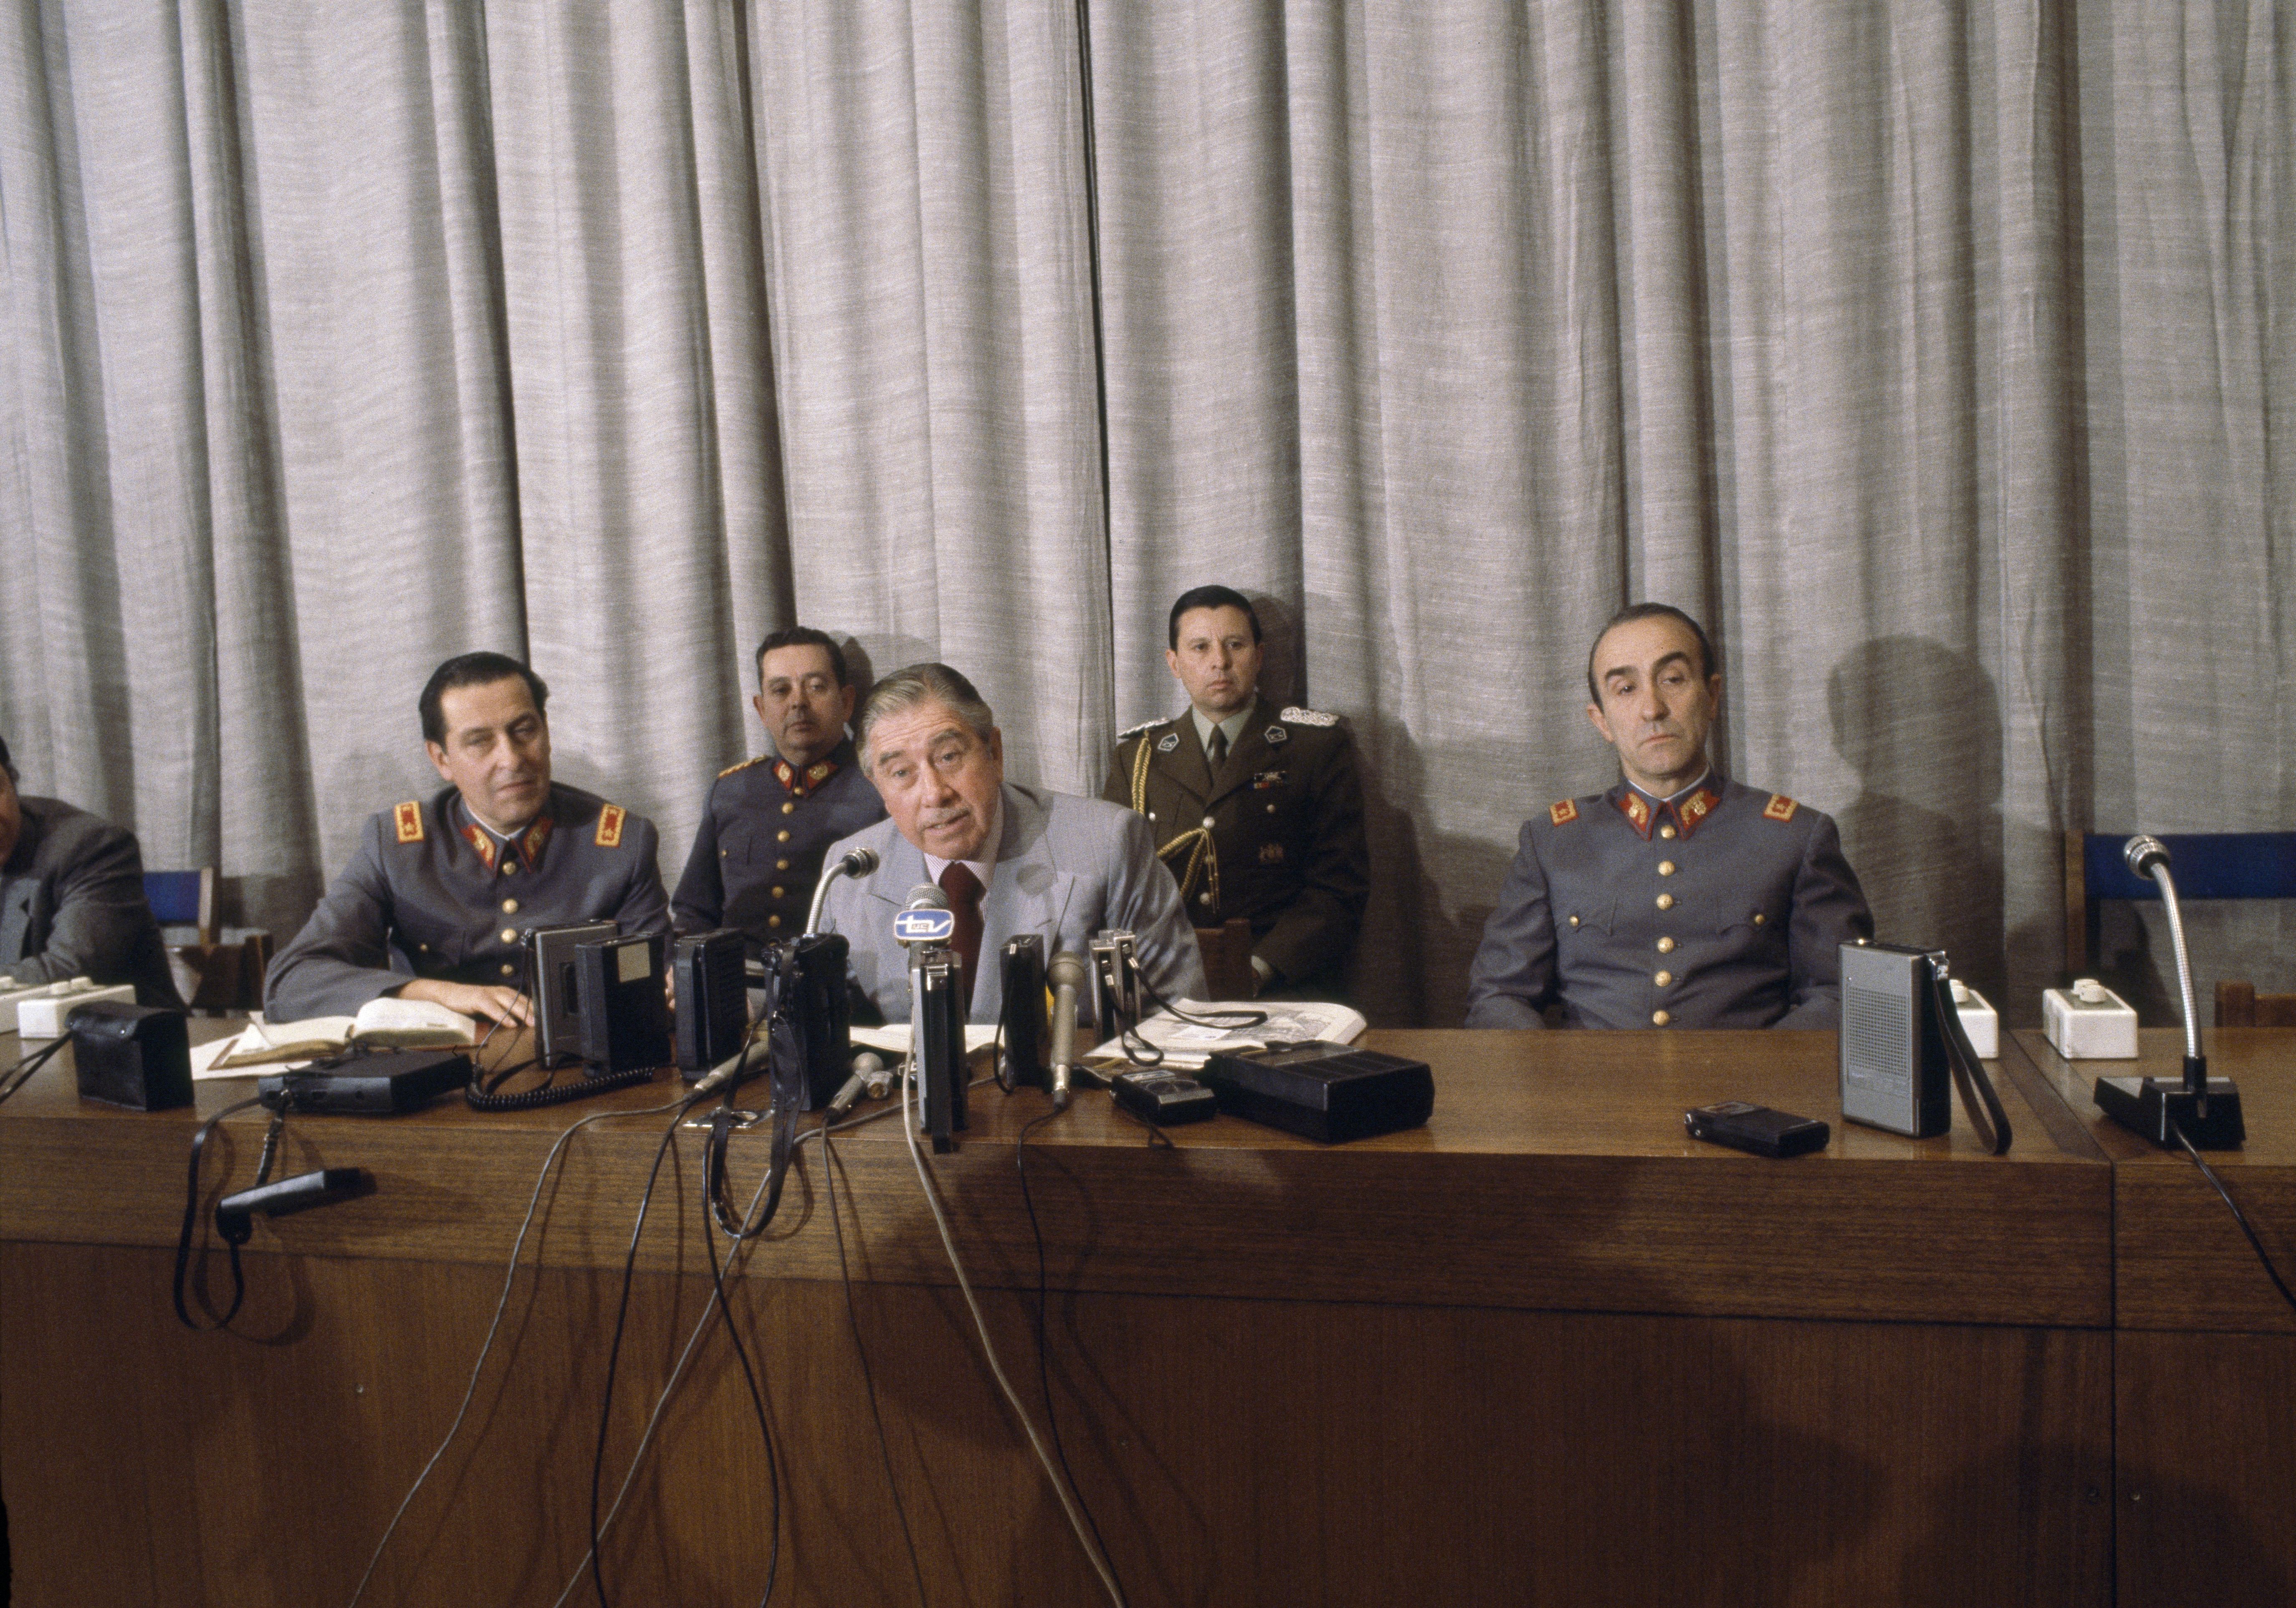 Chilean dictator Augusto Pinochet sits at a long wooden desk with several microphones in front of him as he speaks during an news conference